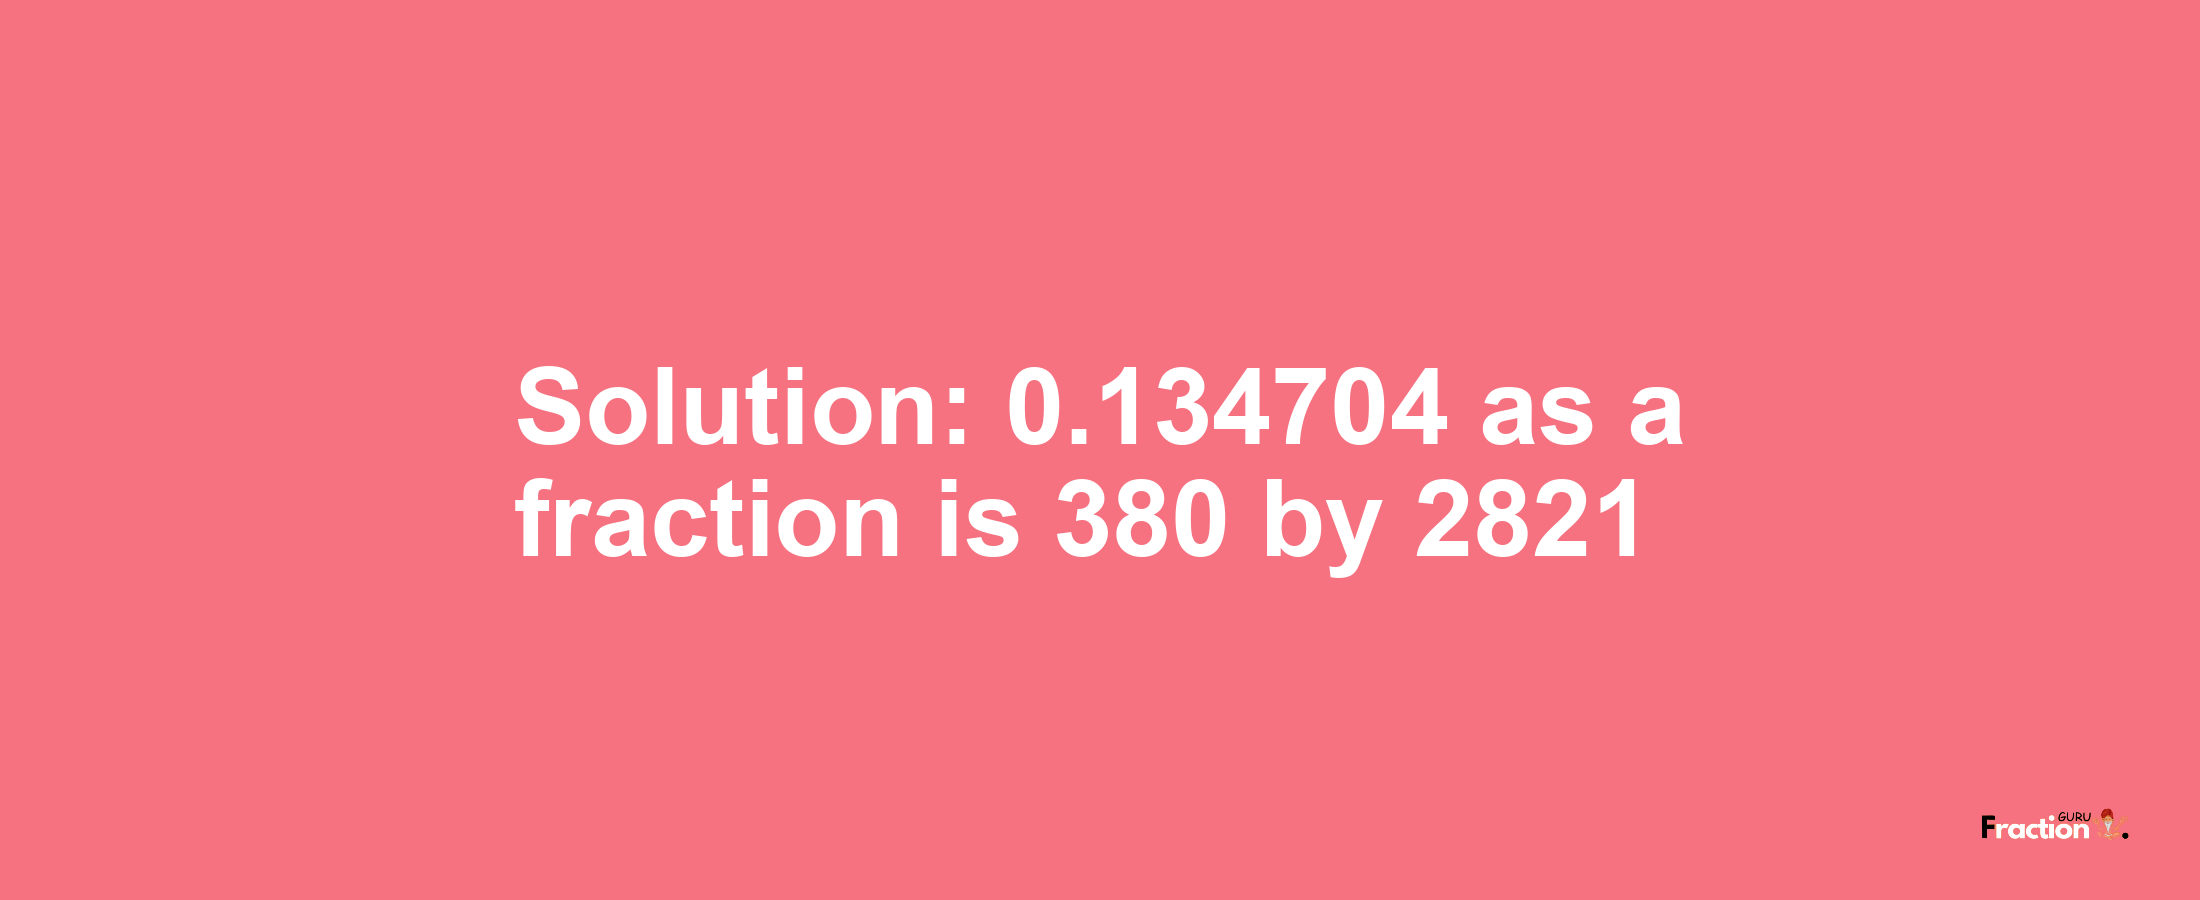 Solution:0.134704 as a fraction is 380/2821